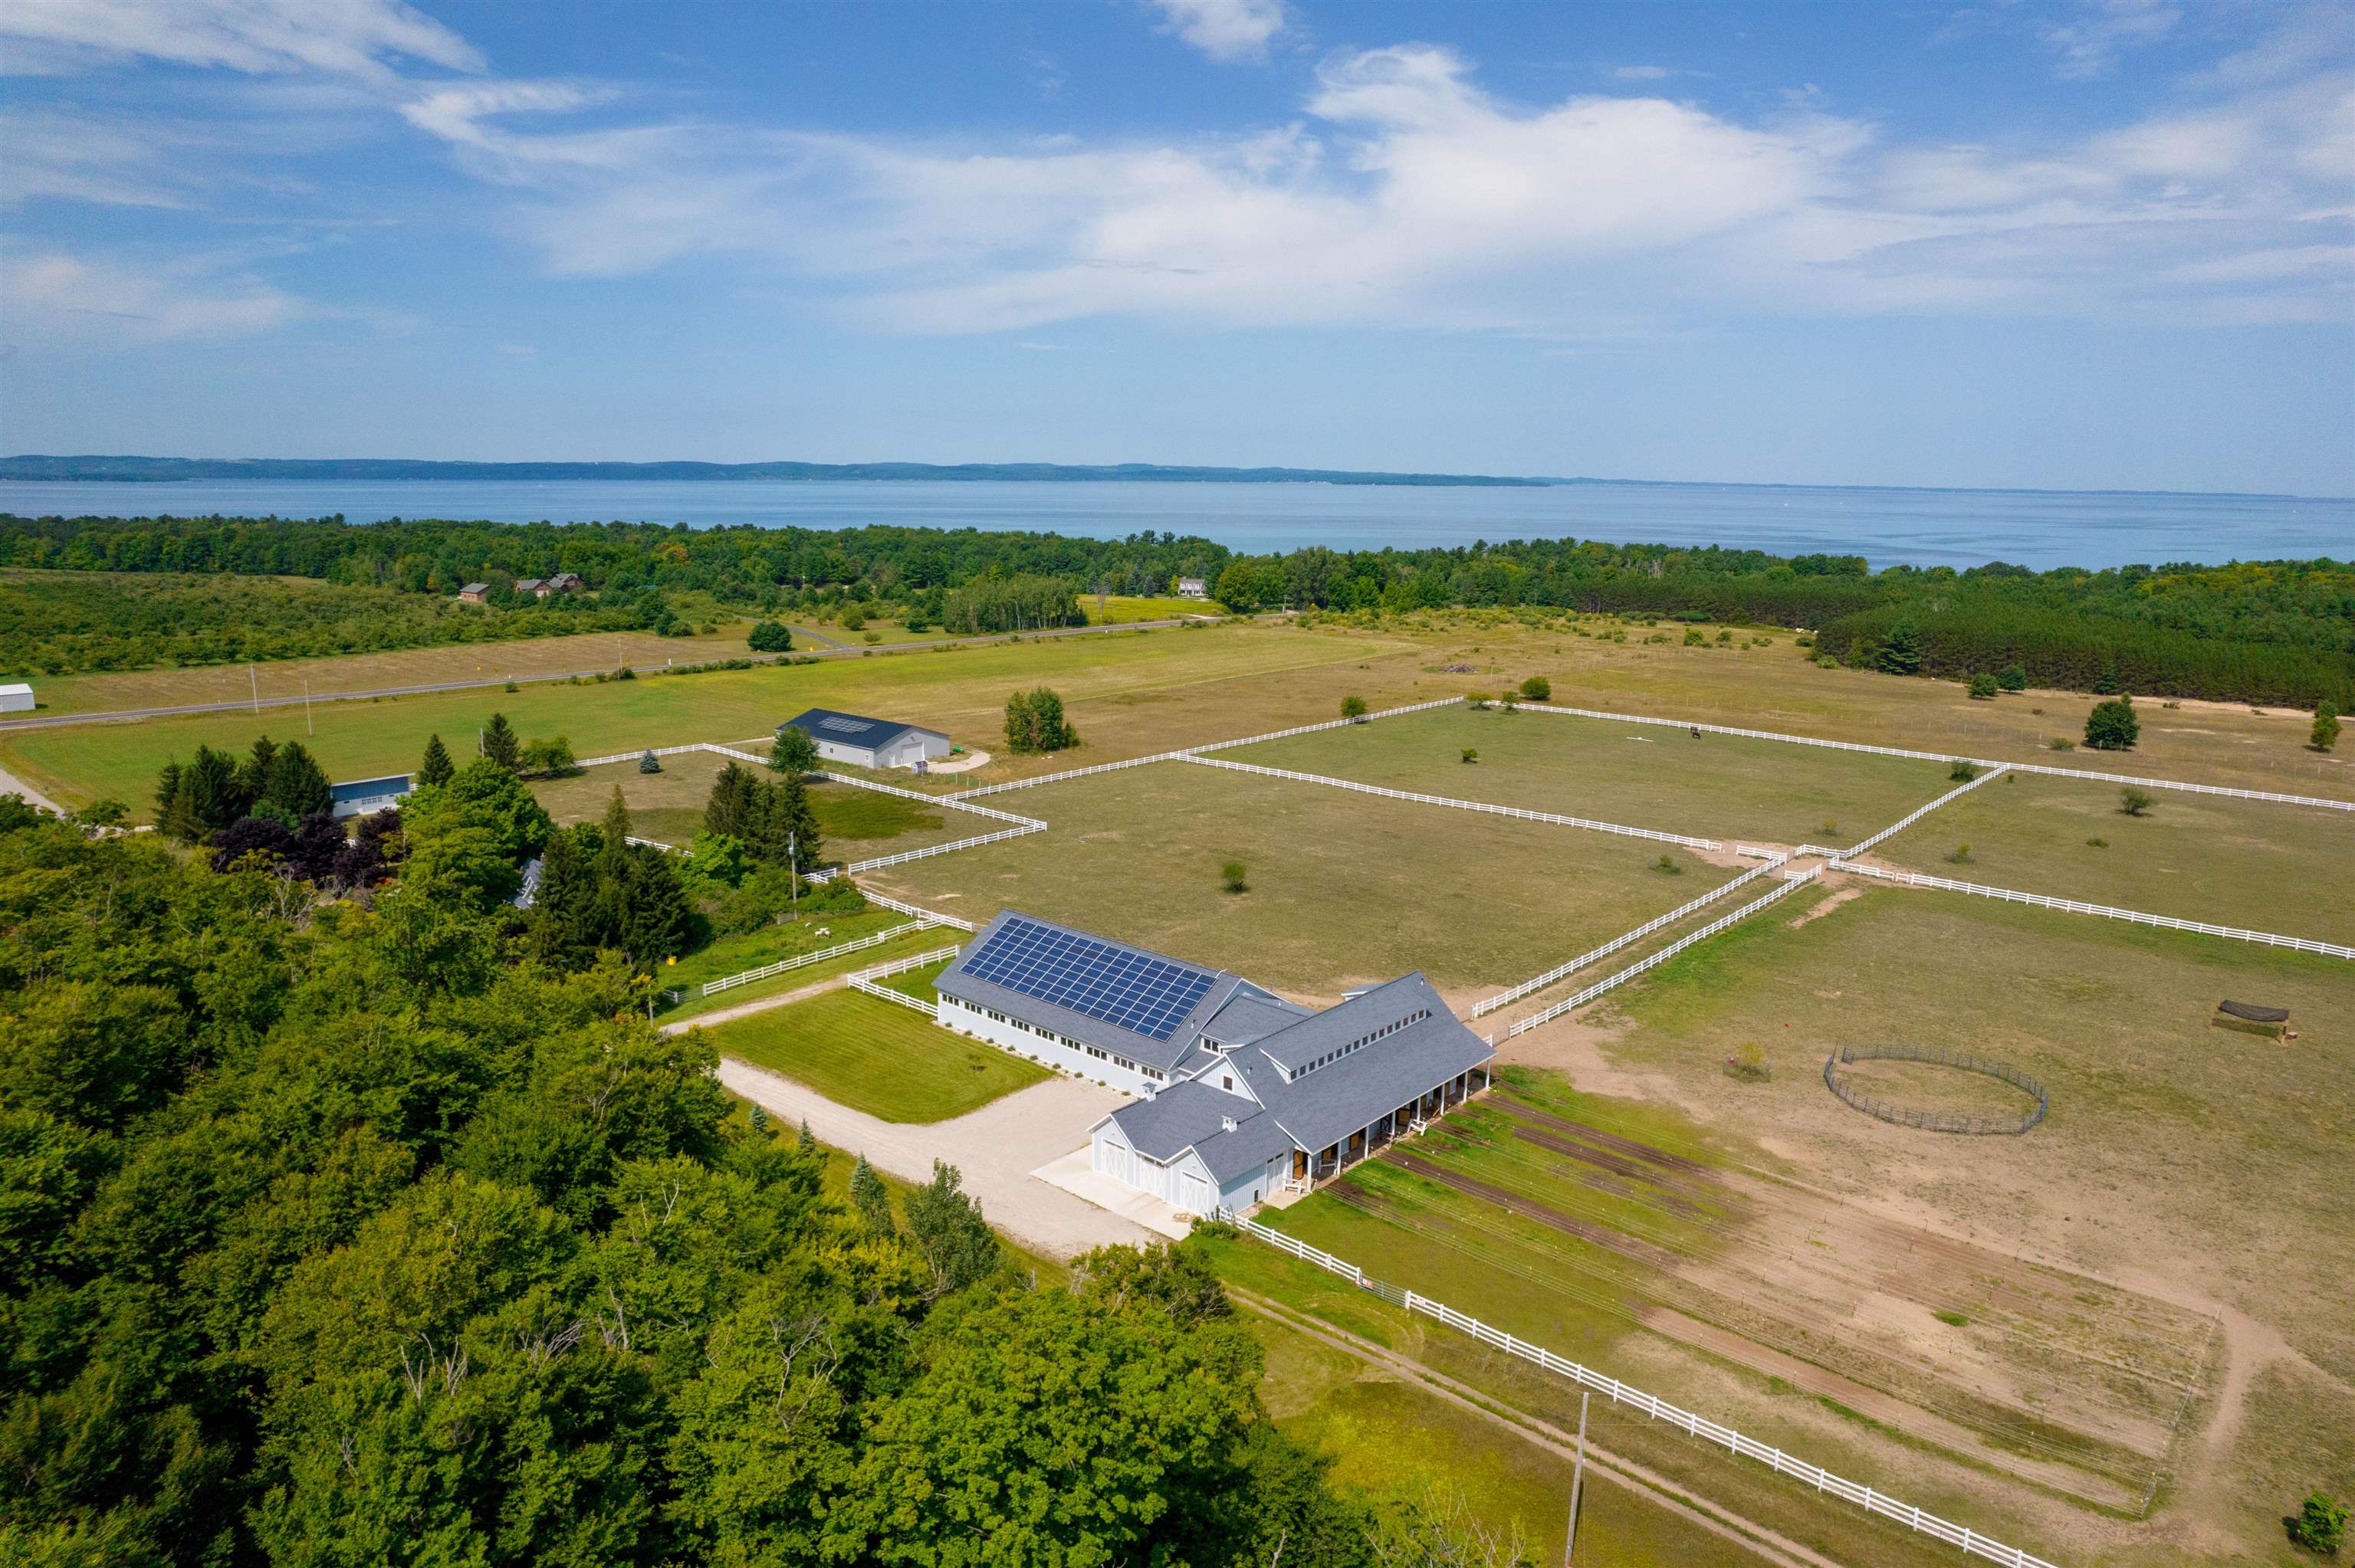 Here is your chance to own a fully working farm on the coveted Old Mission Peninsula in Traverse City, Michigan! Sprawling over 126 acres and consisting of 5 parcels, this property has a rare 300' of private sandy water frontage on West Grand Traverse Bay, an operating equestrian facility, a turn of the century farm house, and multiple outbuildings. Complete with livestock including 1 Rocky Mountain horse and 6 purebred Great Pyrenees guard dogs. The land has 2000+ Christmas trees, 300+ lavender Vera plants, and 15 acres already in rotational crop. The equestrian barn, built in 2016, features 9 stalls, garage doors for work vehicles, saddle room, employee break room and laundry, grooming areas, and an expansive 60x100 heated dirt arena for working the horses. Walking upstairs, you will find a large office space with picture windows overlooking the stalls and a viewing balcony for the training arena. There are multiple outbuildings on the property including a newly built (2020) pole barn currently used for hay and tractor storage. Equipment, tack, and feed included with property - perfect for an experienced/aspiring farmer or equestrian enthusiast. Surrounded by beautiful Traverse City countryside with only a short walk to your own private sandy beach on the bay, this is an opportunity you do not want to miss!